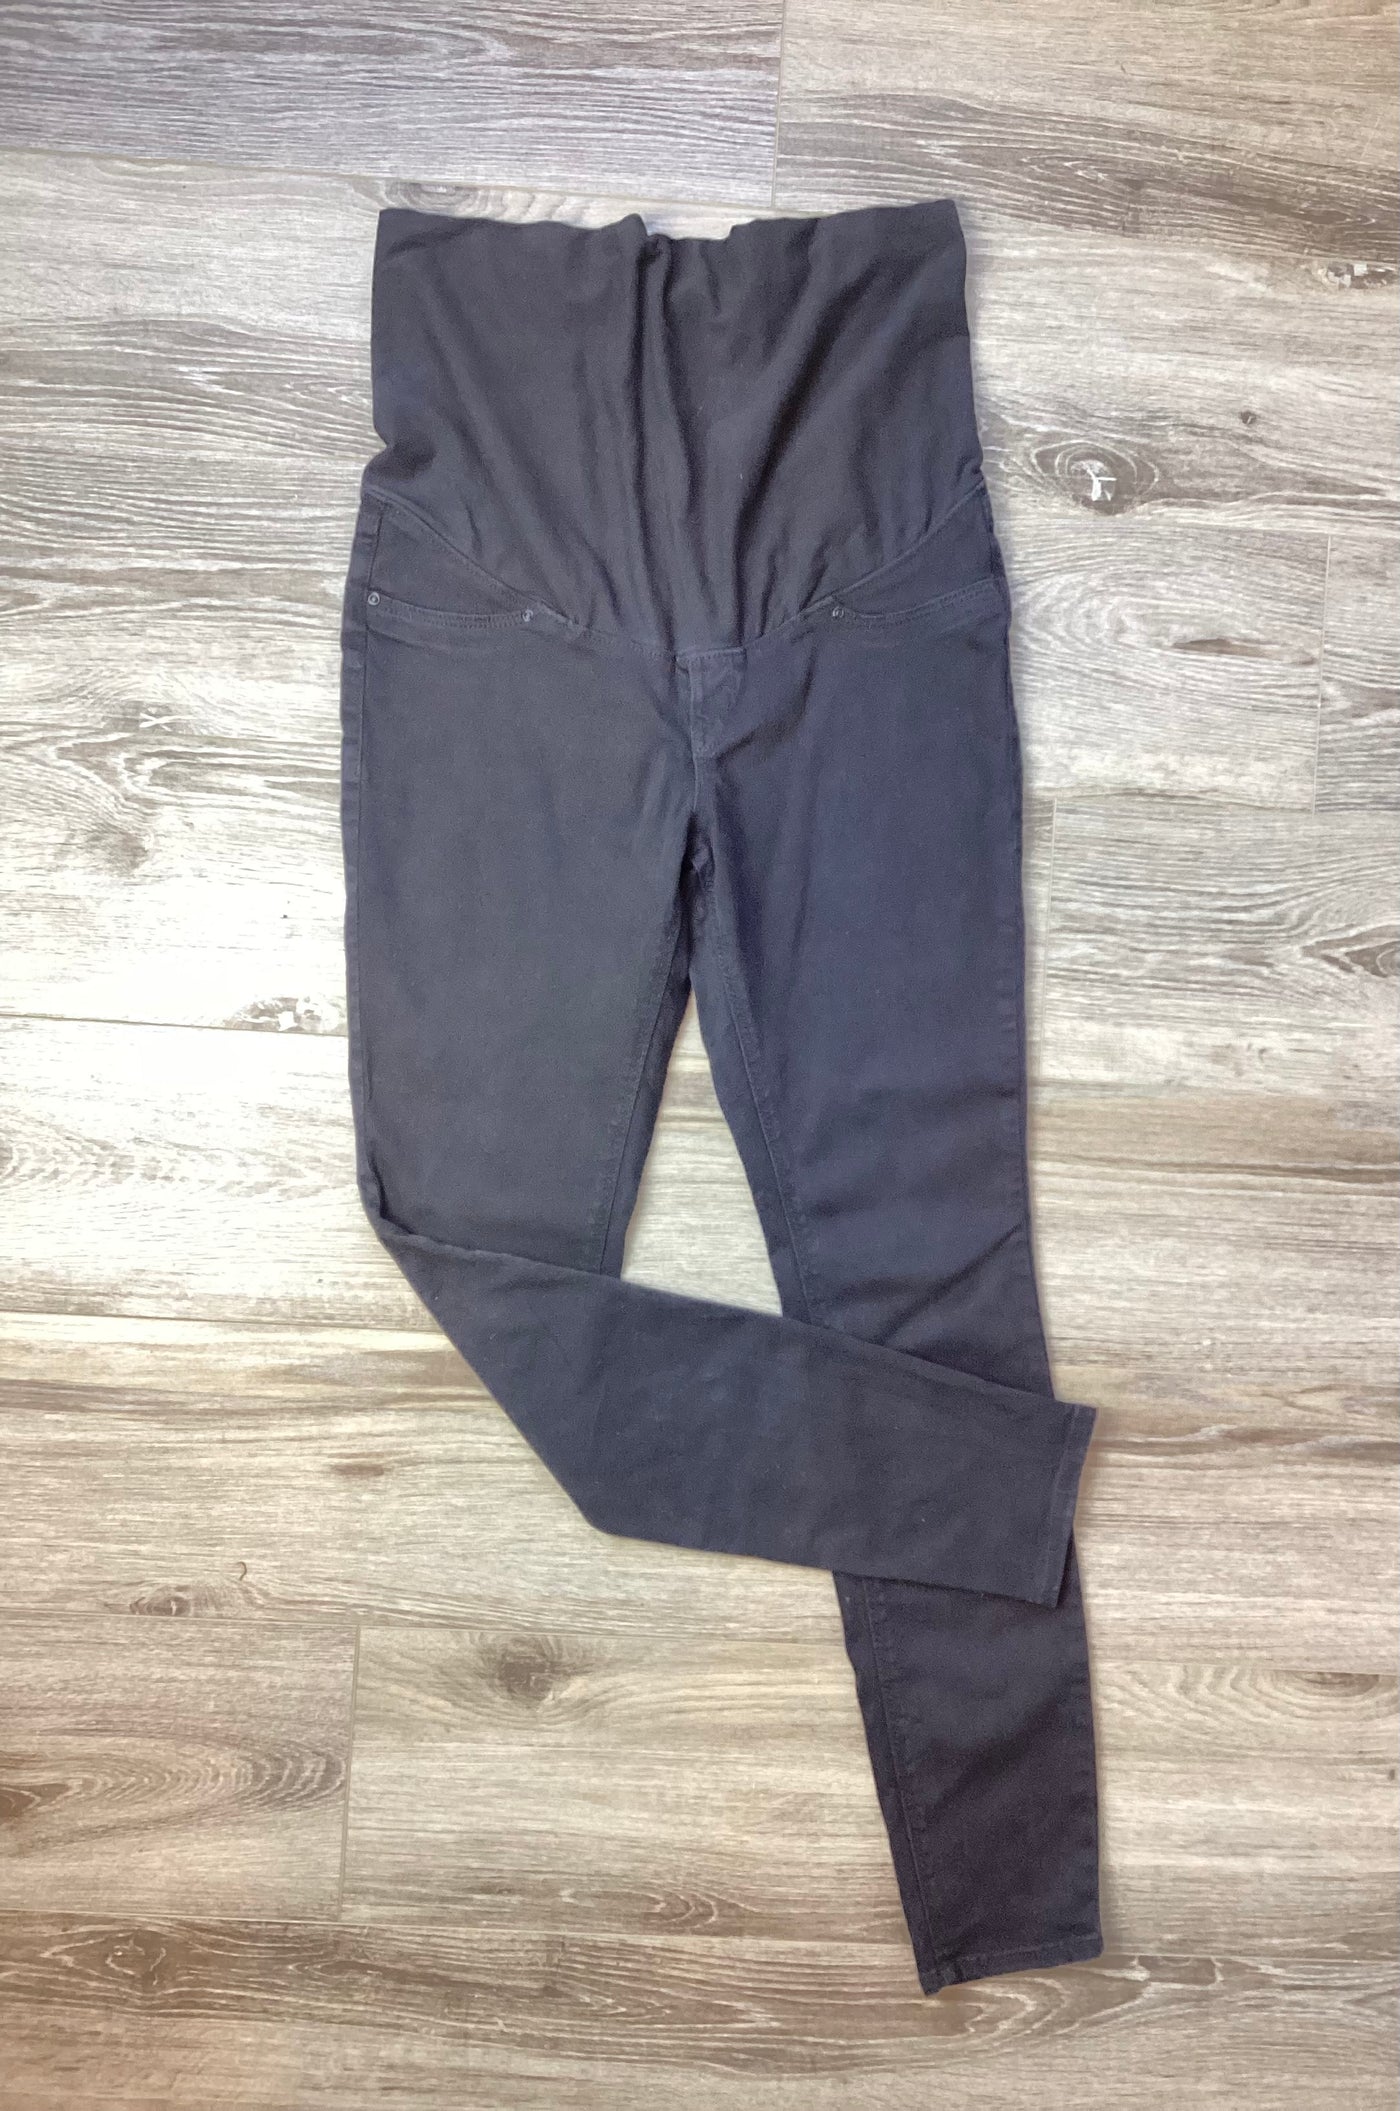 H&M Mama black overbump jeans - Size M (Approx UK 10/12)